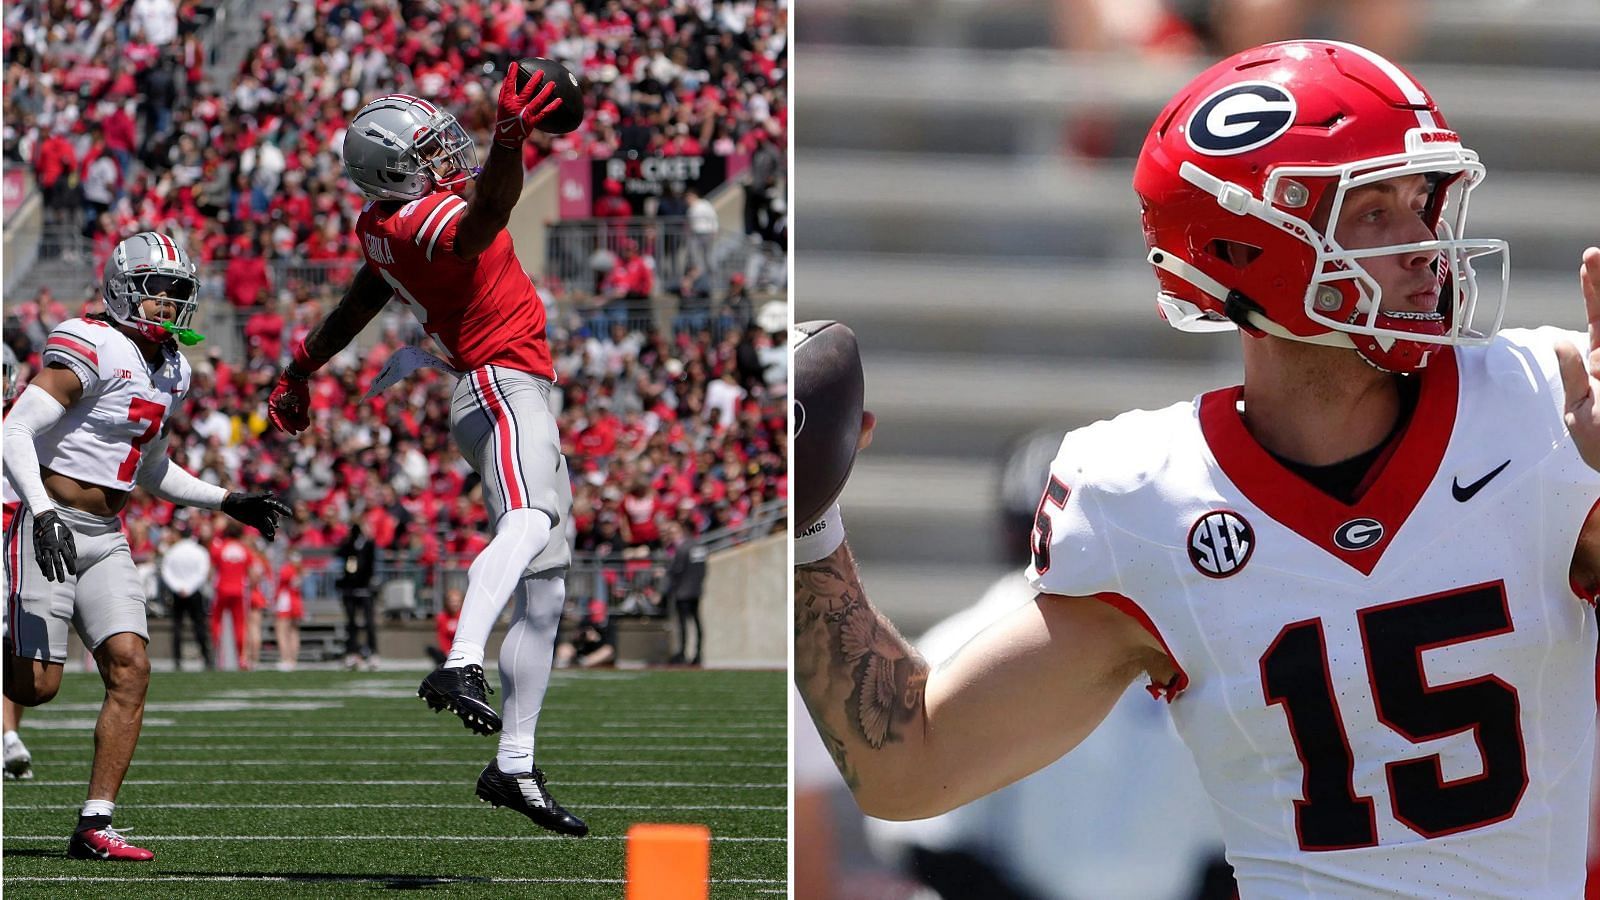 Ohio State and Georgia could both challenge Michigan